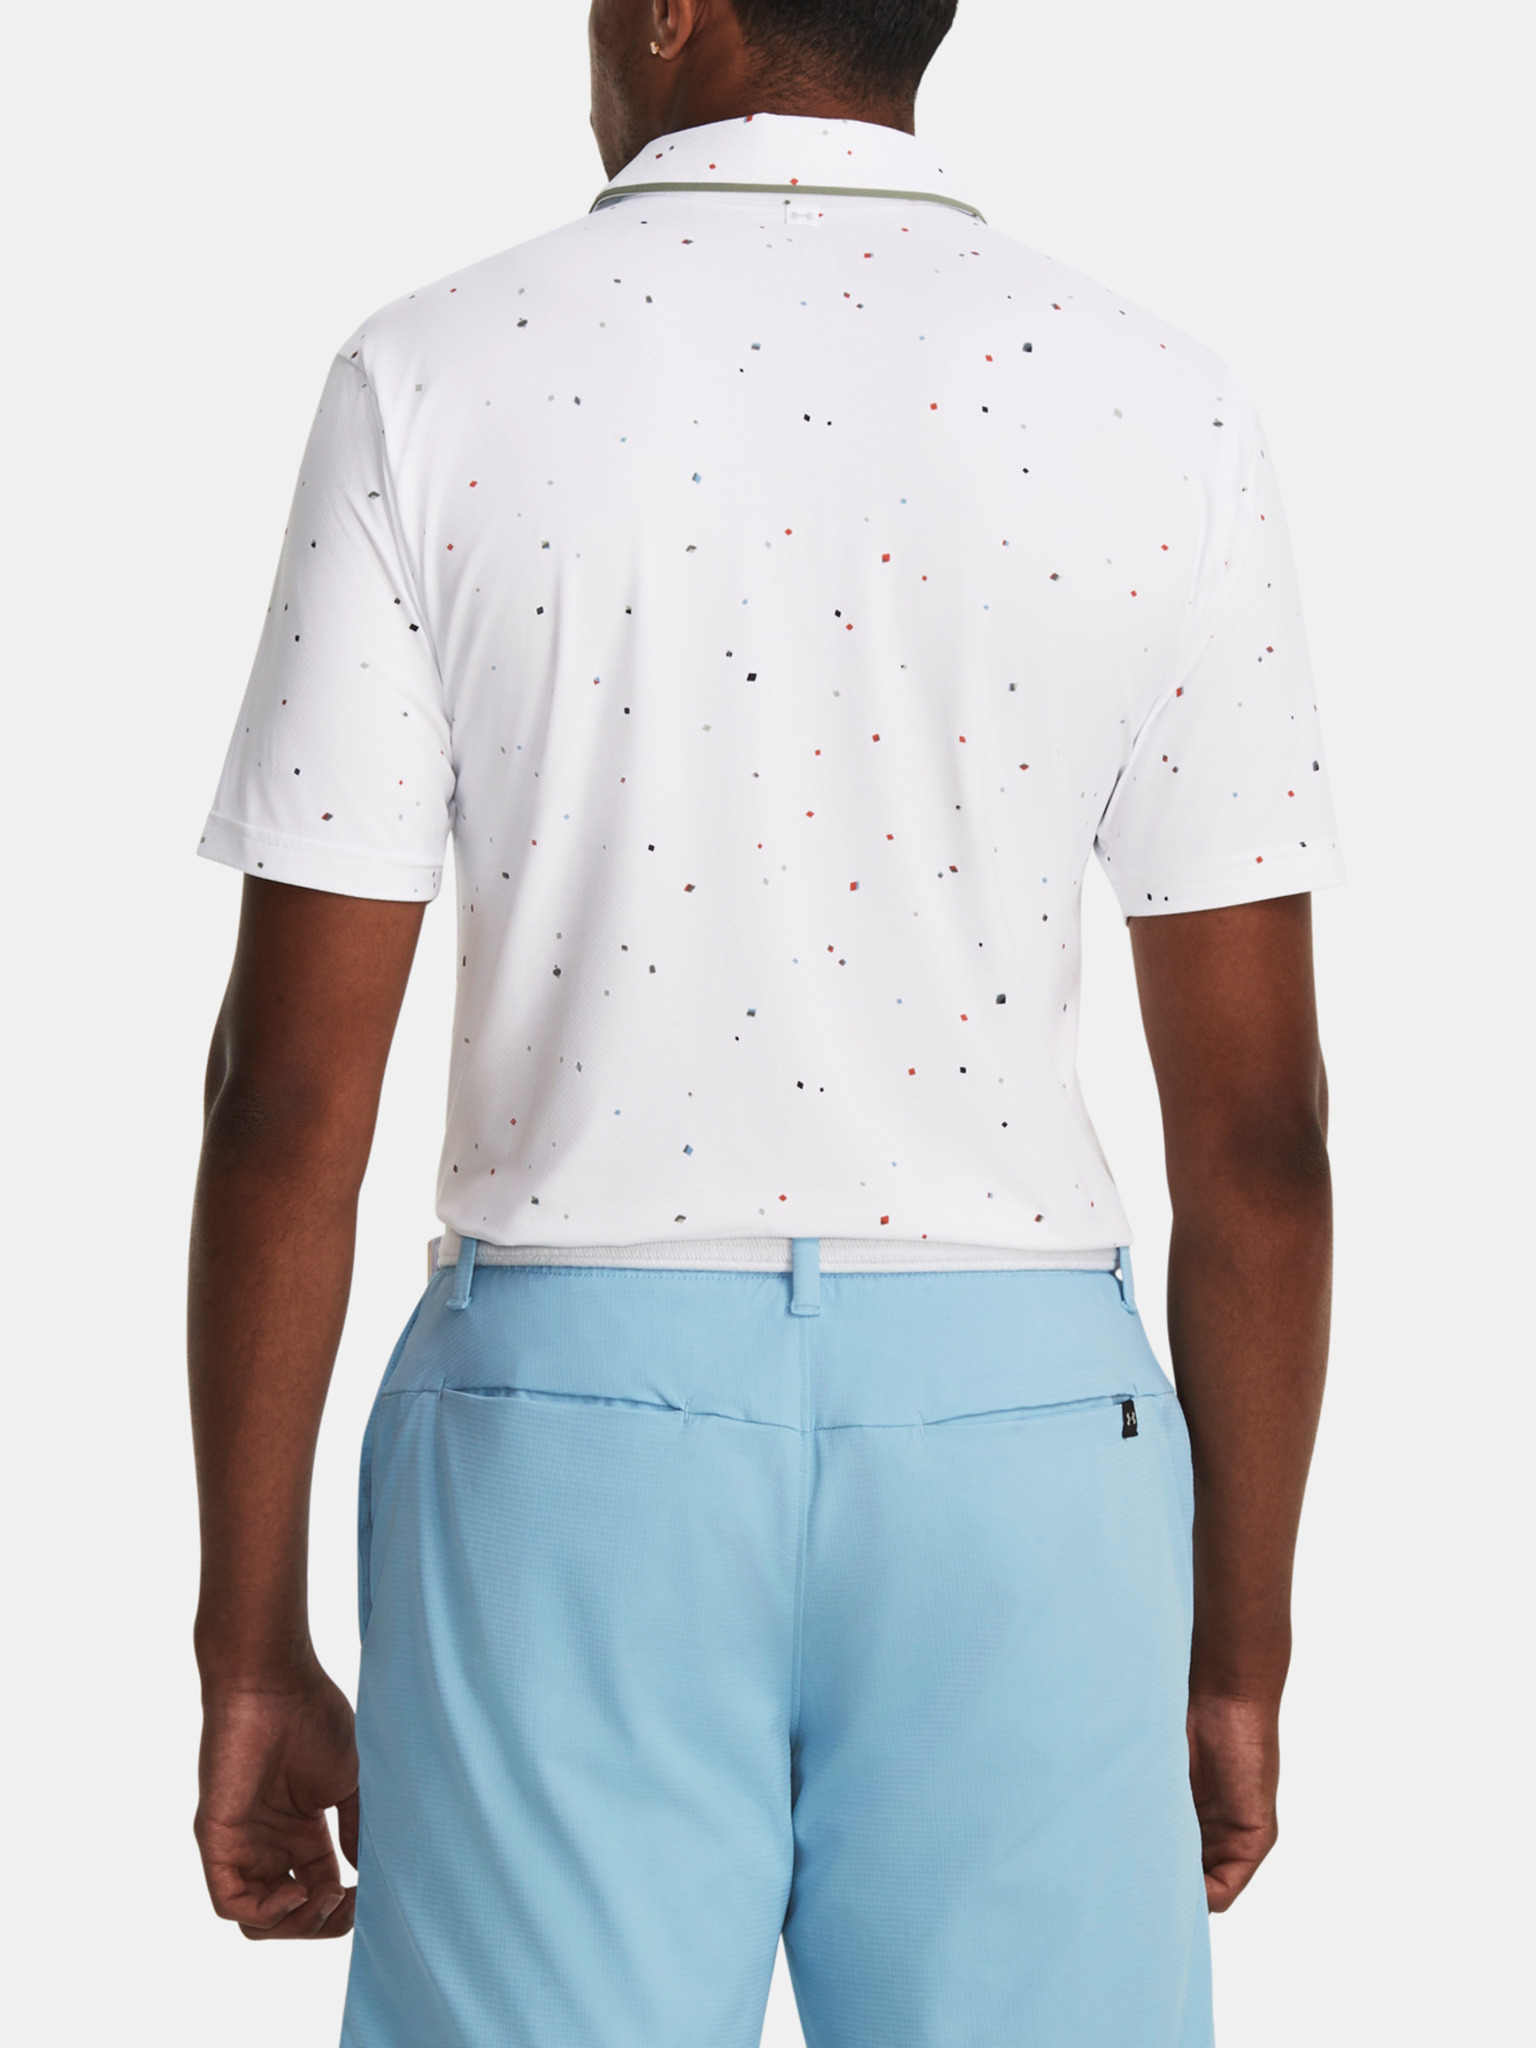 Under Armour - UA Iso-Chill Verge Polo Shirt